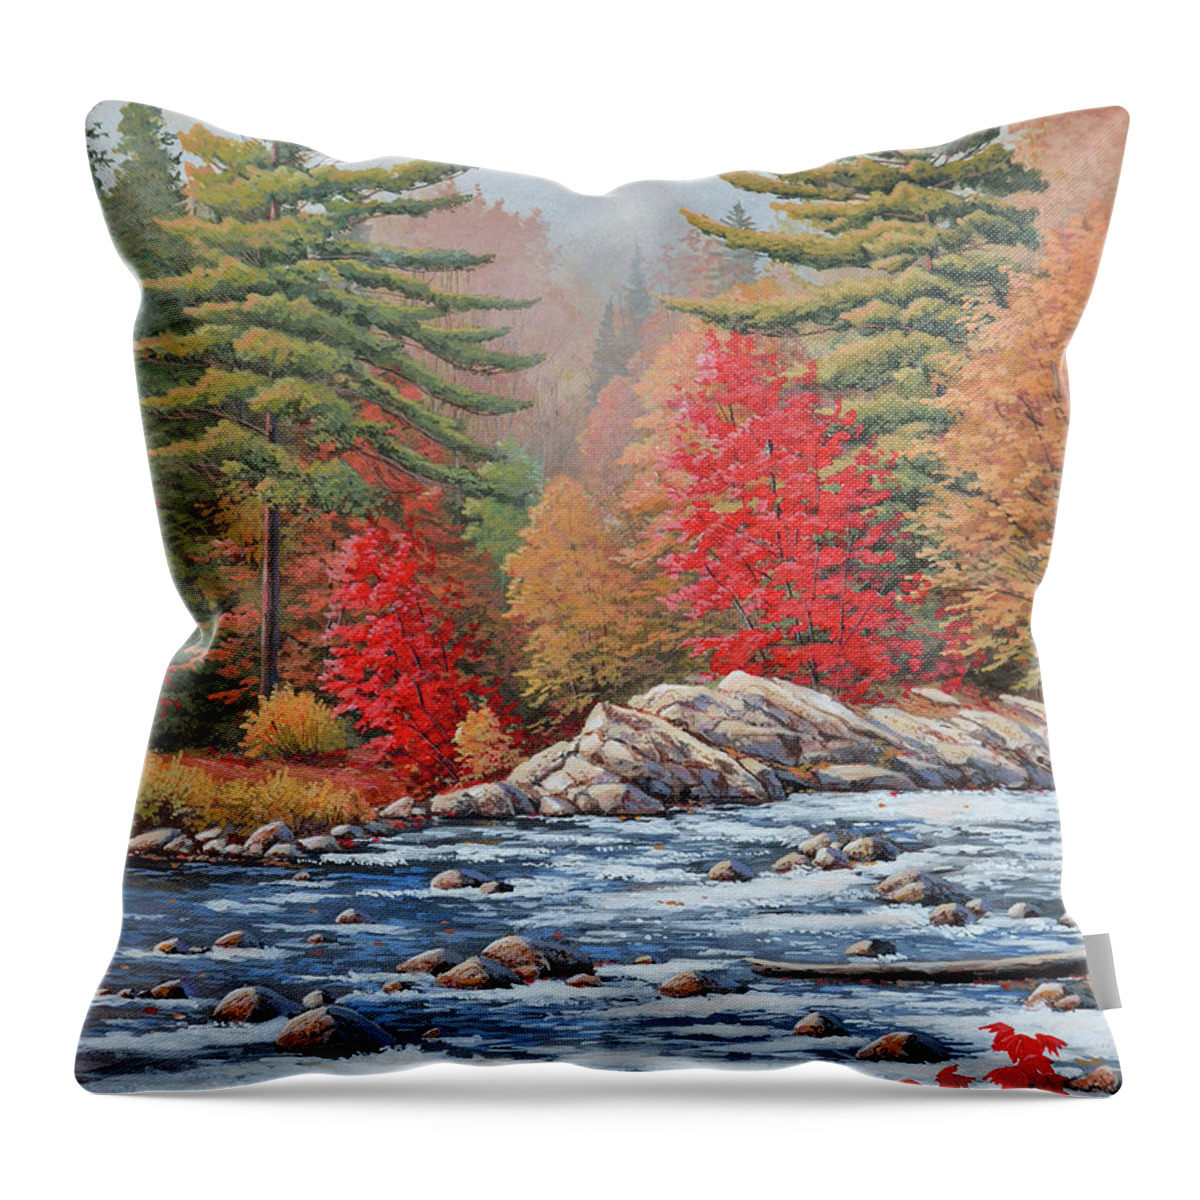 Jake Vandenbrink Throw Pillow featuring the painting Red Maples, White Water by Jake Vandenbrink